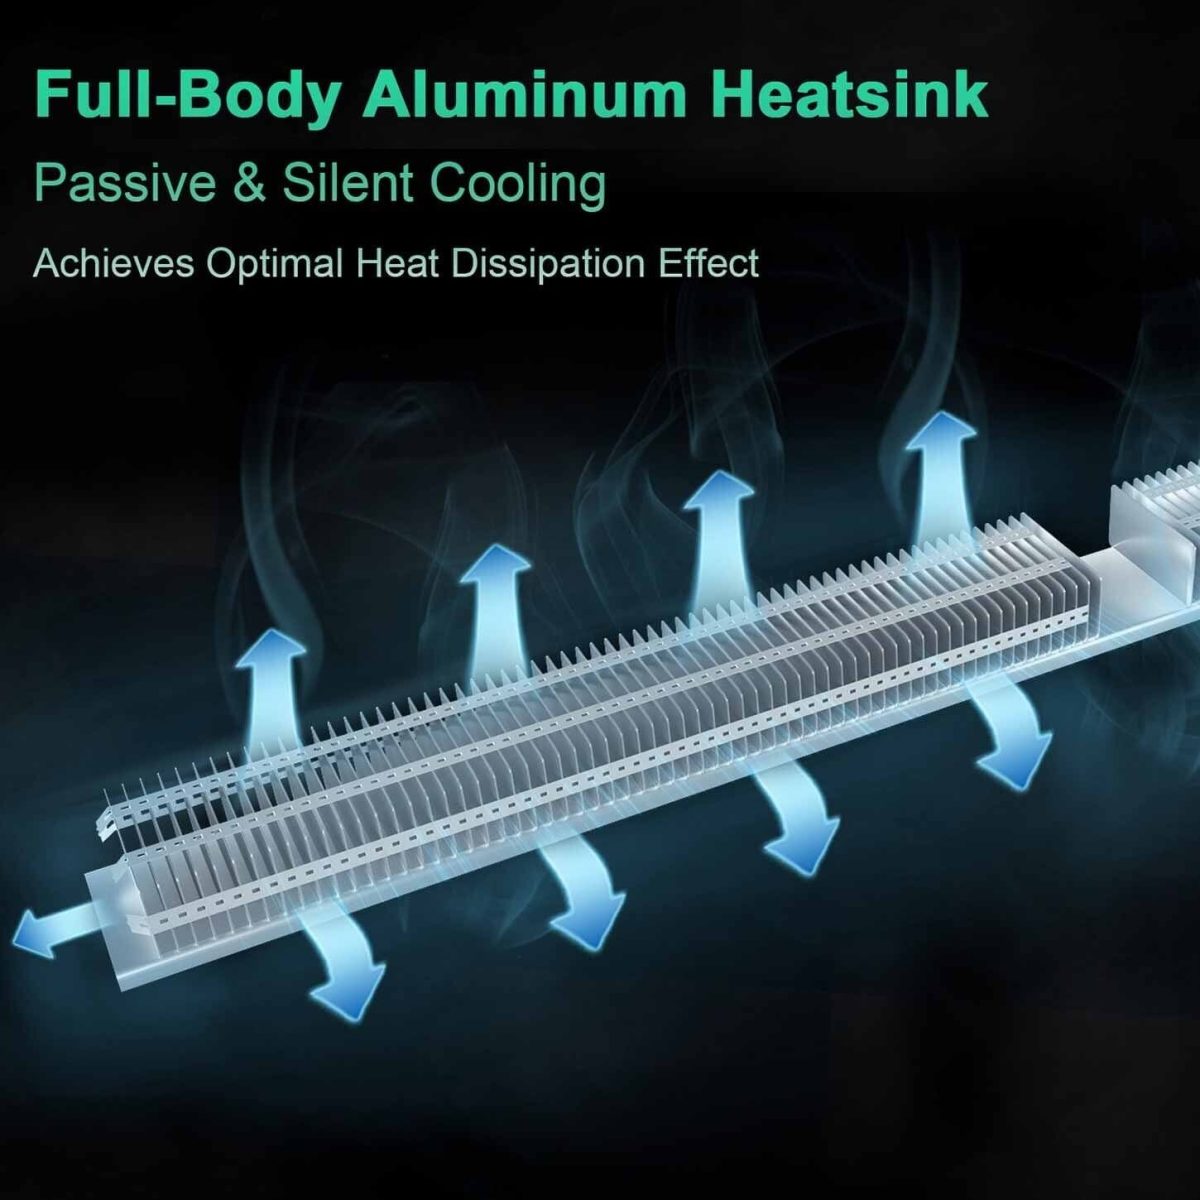 Sp150 is with full body aluminum heatsink that achieves optional heat dissipation